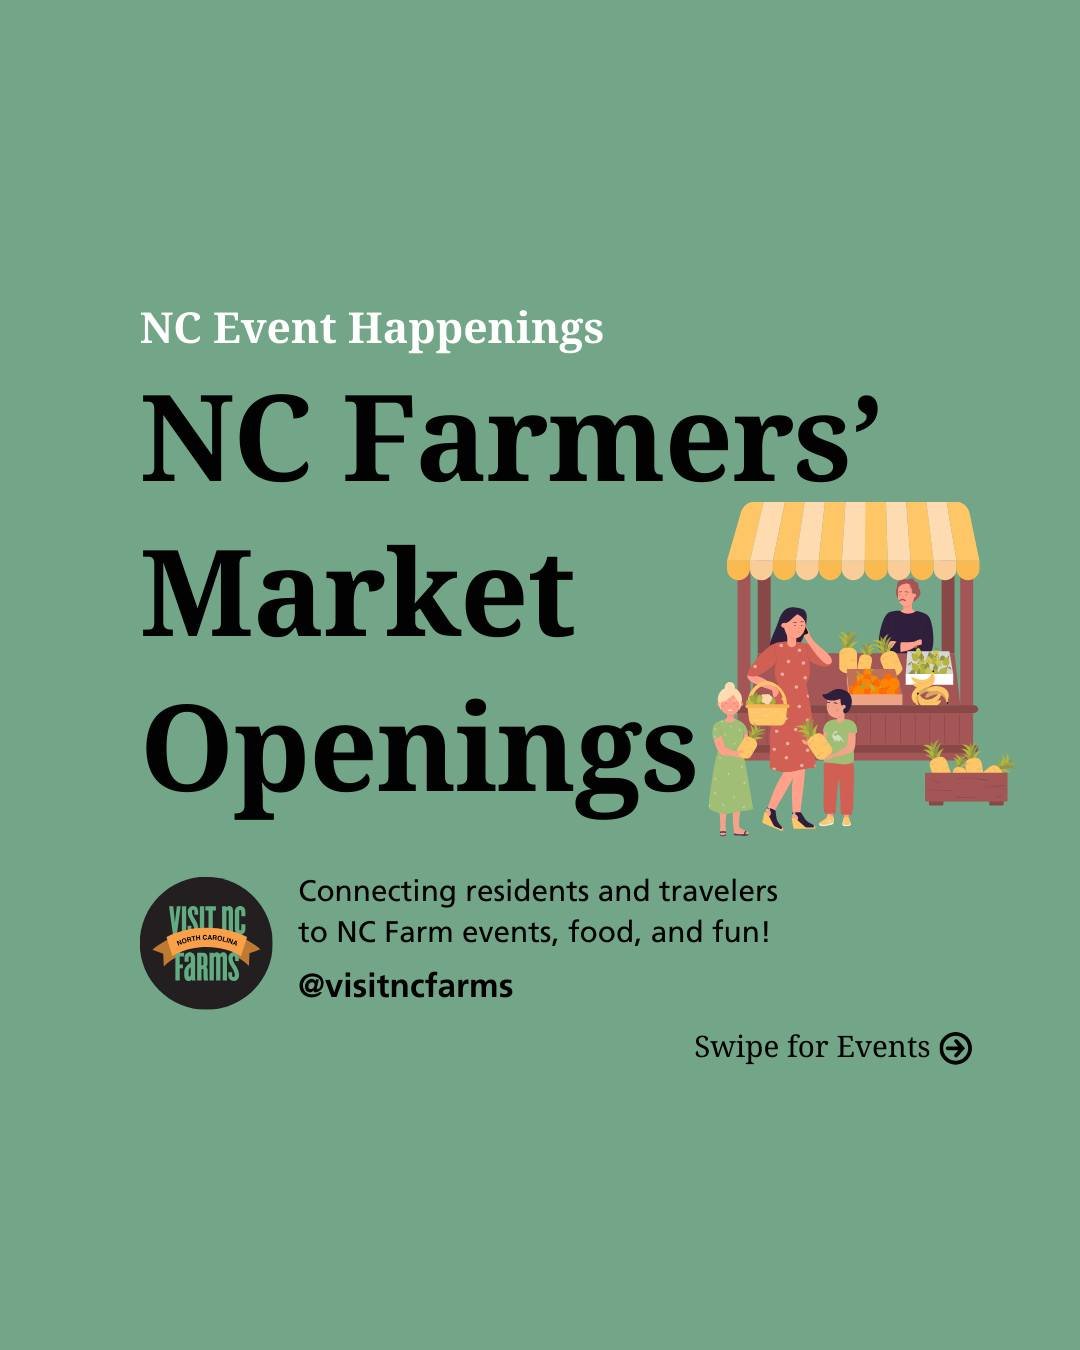 Spring is in the air and all of our favorite farmers' markets are opening for the main season! ☀️Check out these markets across North Carolina that you can enjoy this spring and summer.

@nmcommunityfarmersmkt 🧑&zwj;🌾 Now open Wednesdays from 8am-1